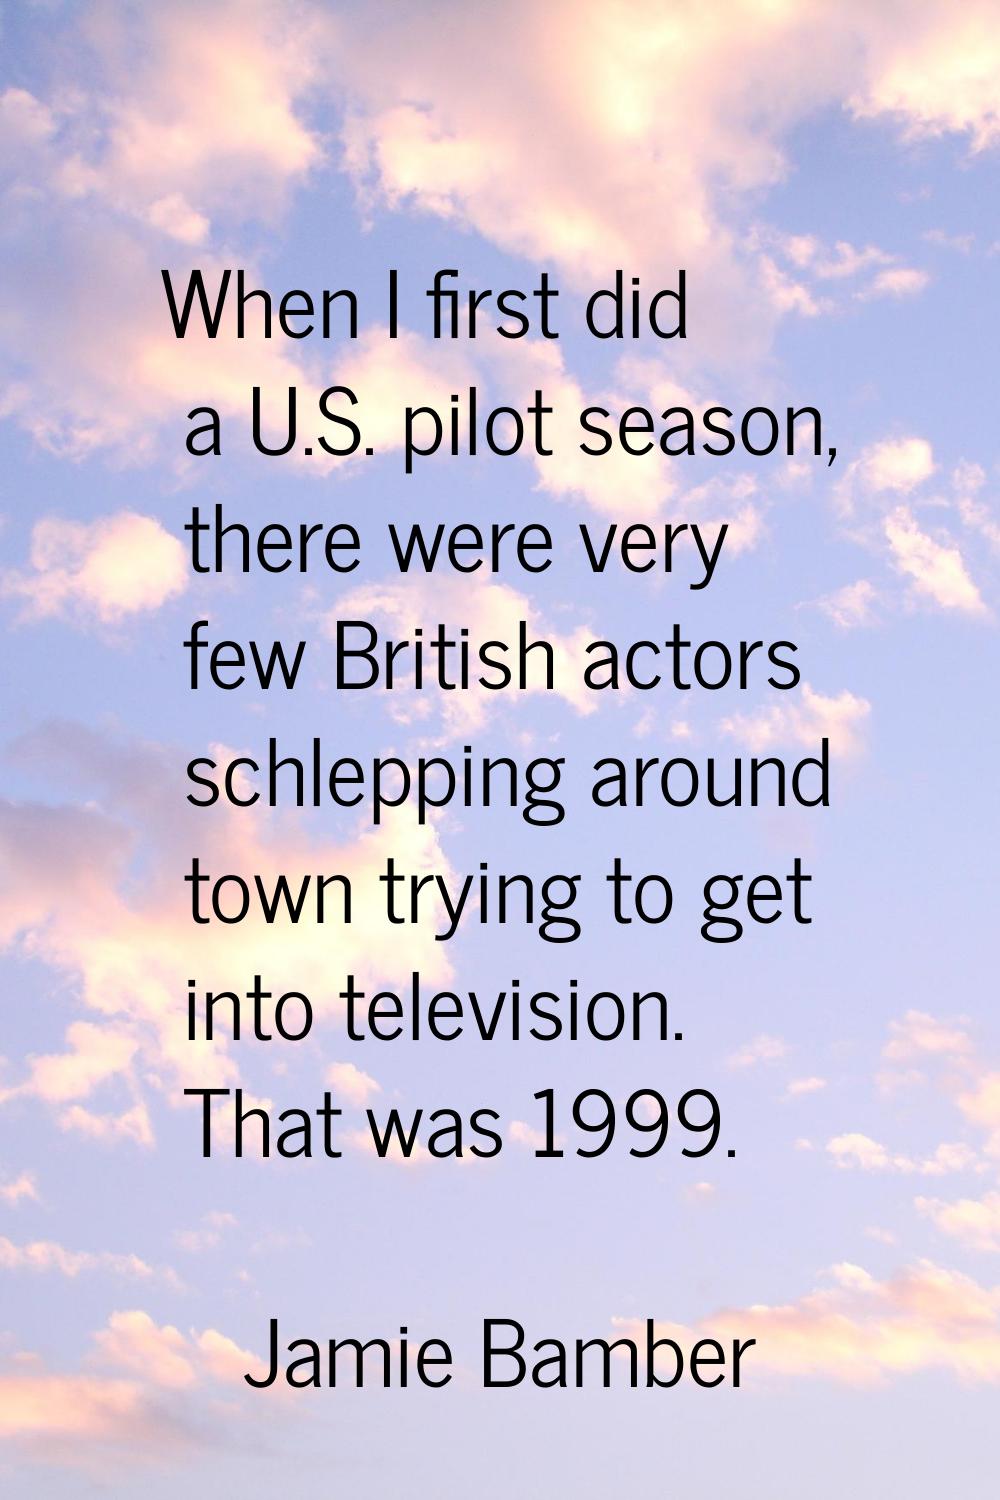 When I first did a U.S. pilot season, there were very few British actors schlepping around town try